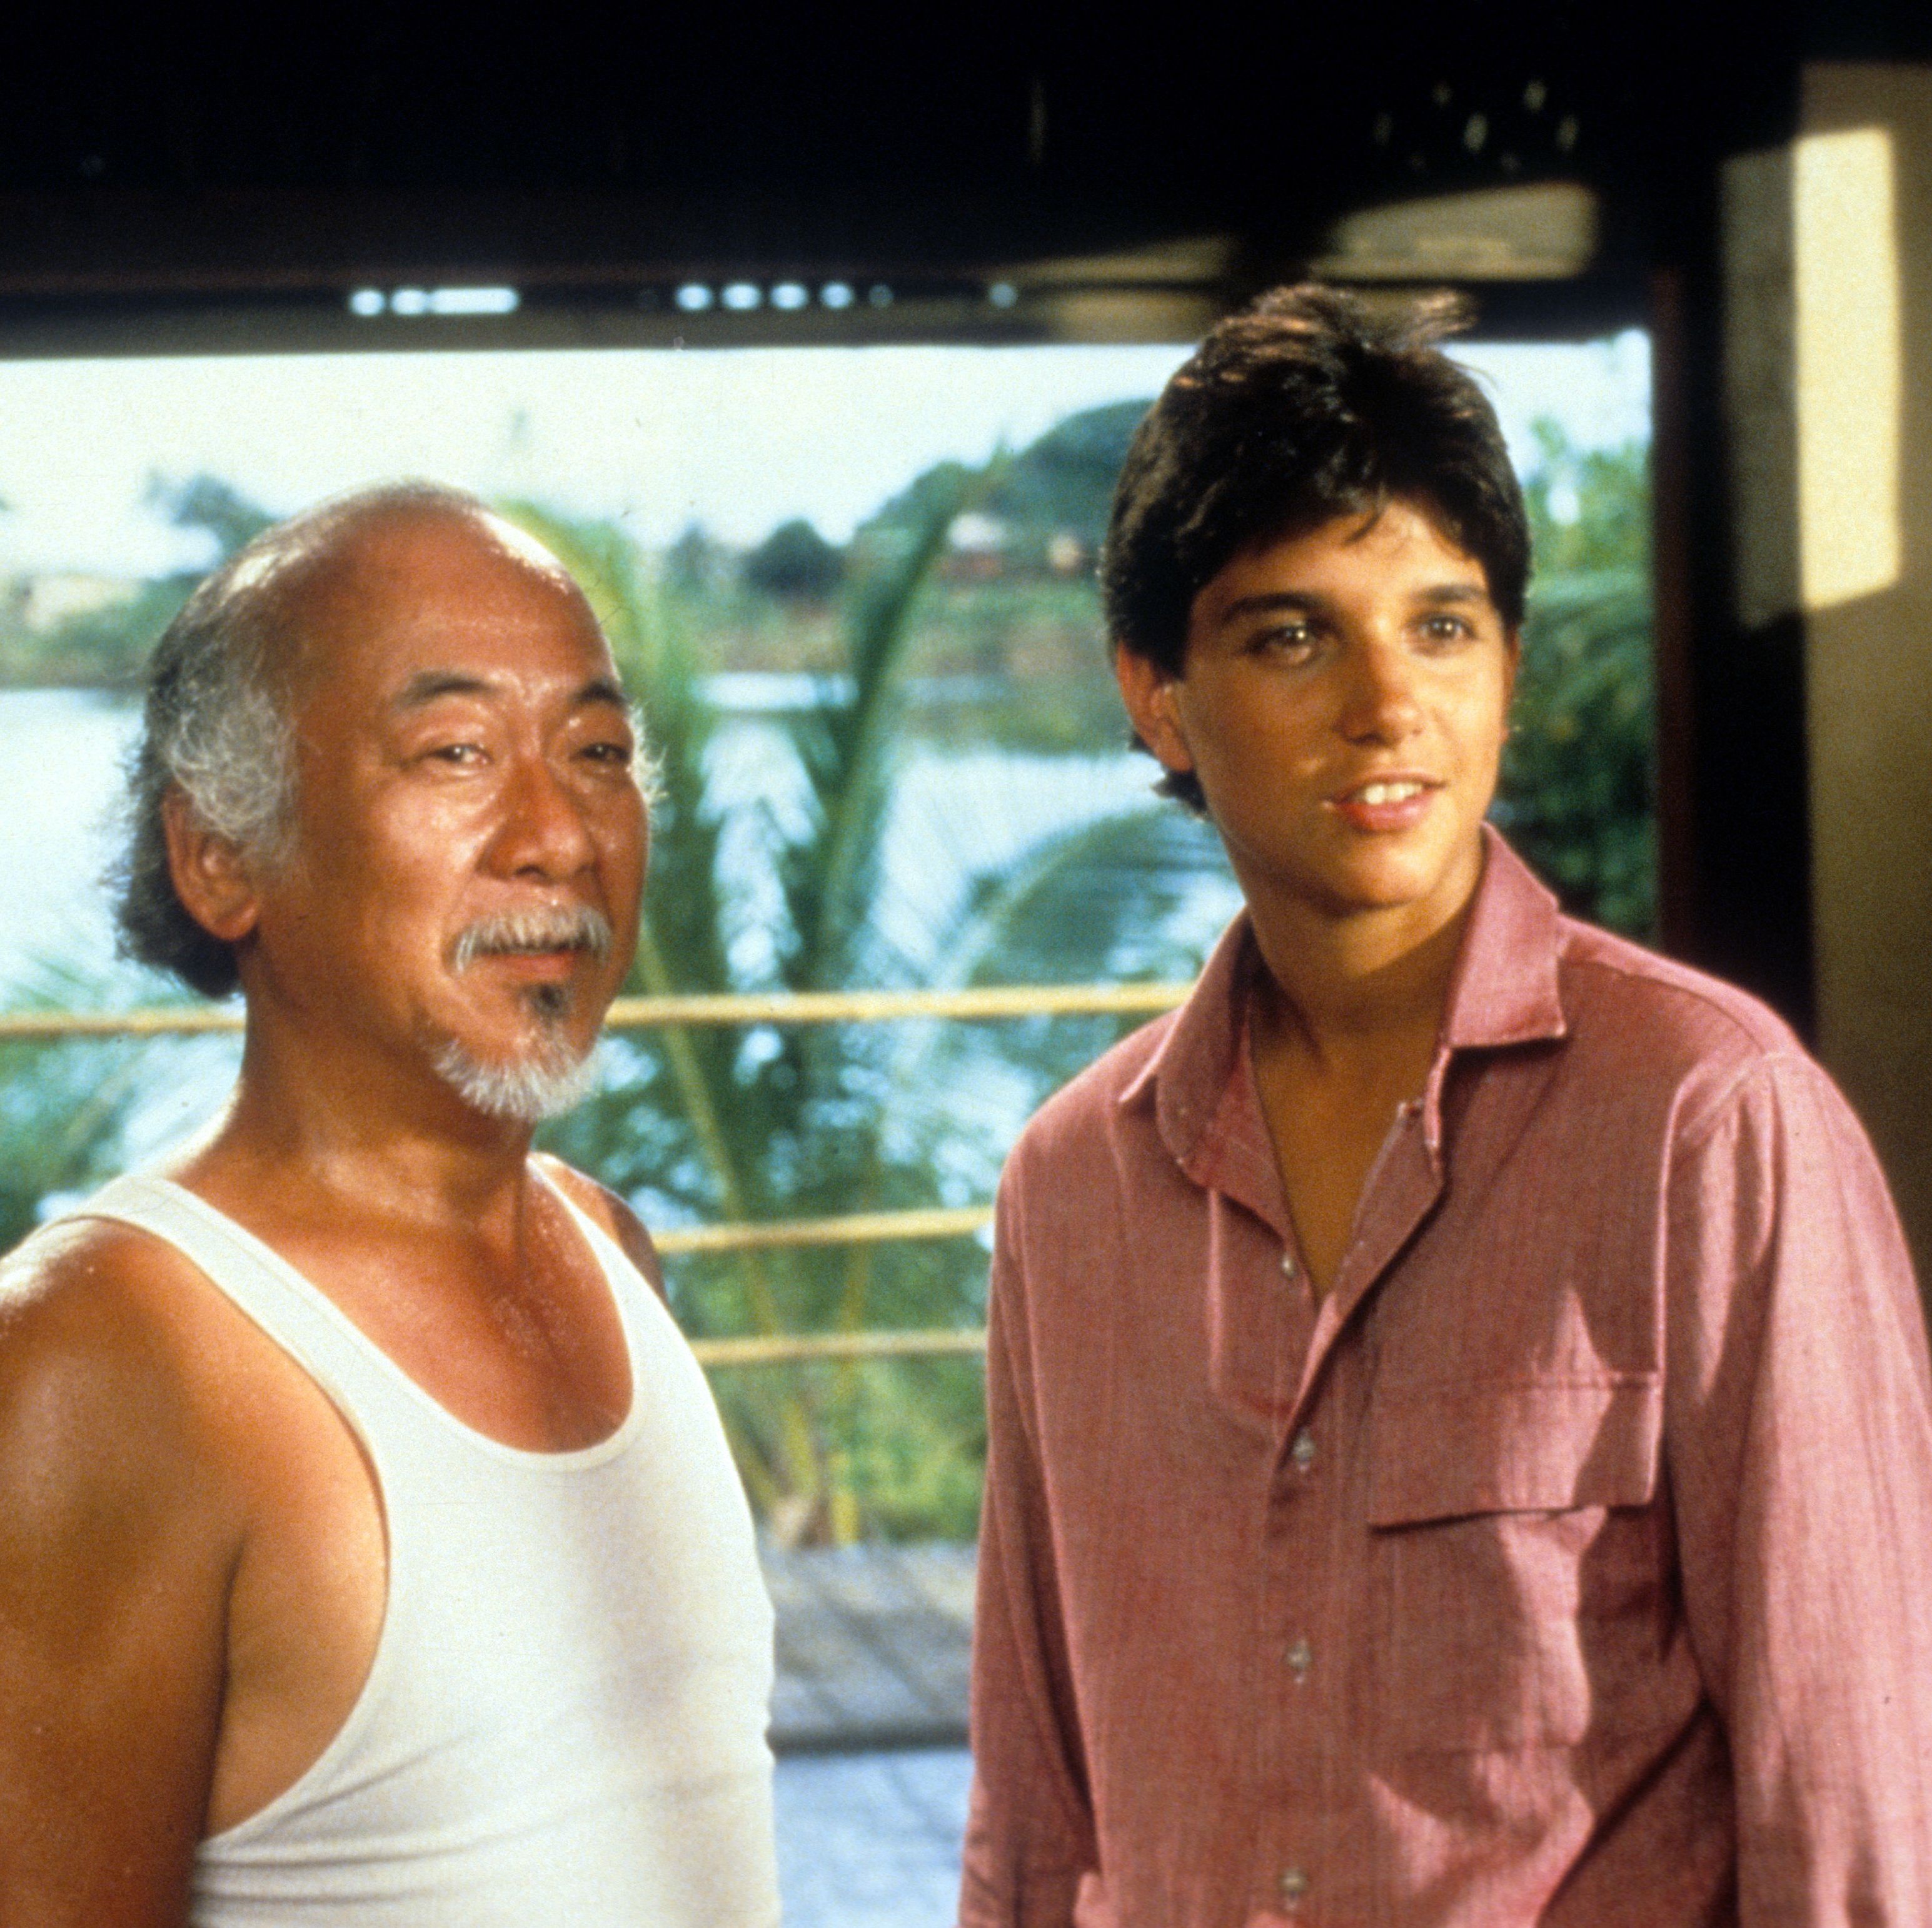 Want to Become a Better Student? Add Some Variety to Your Practice Just Like Mr. Miyagi